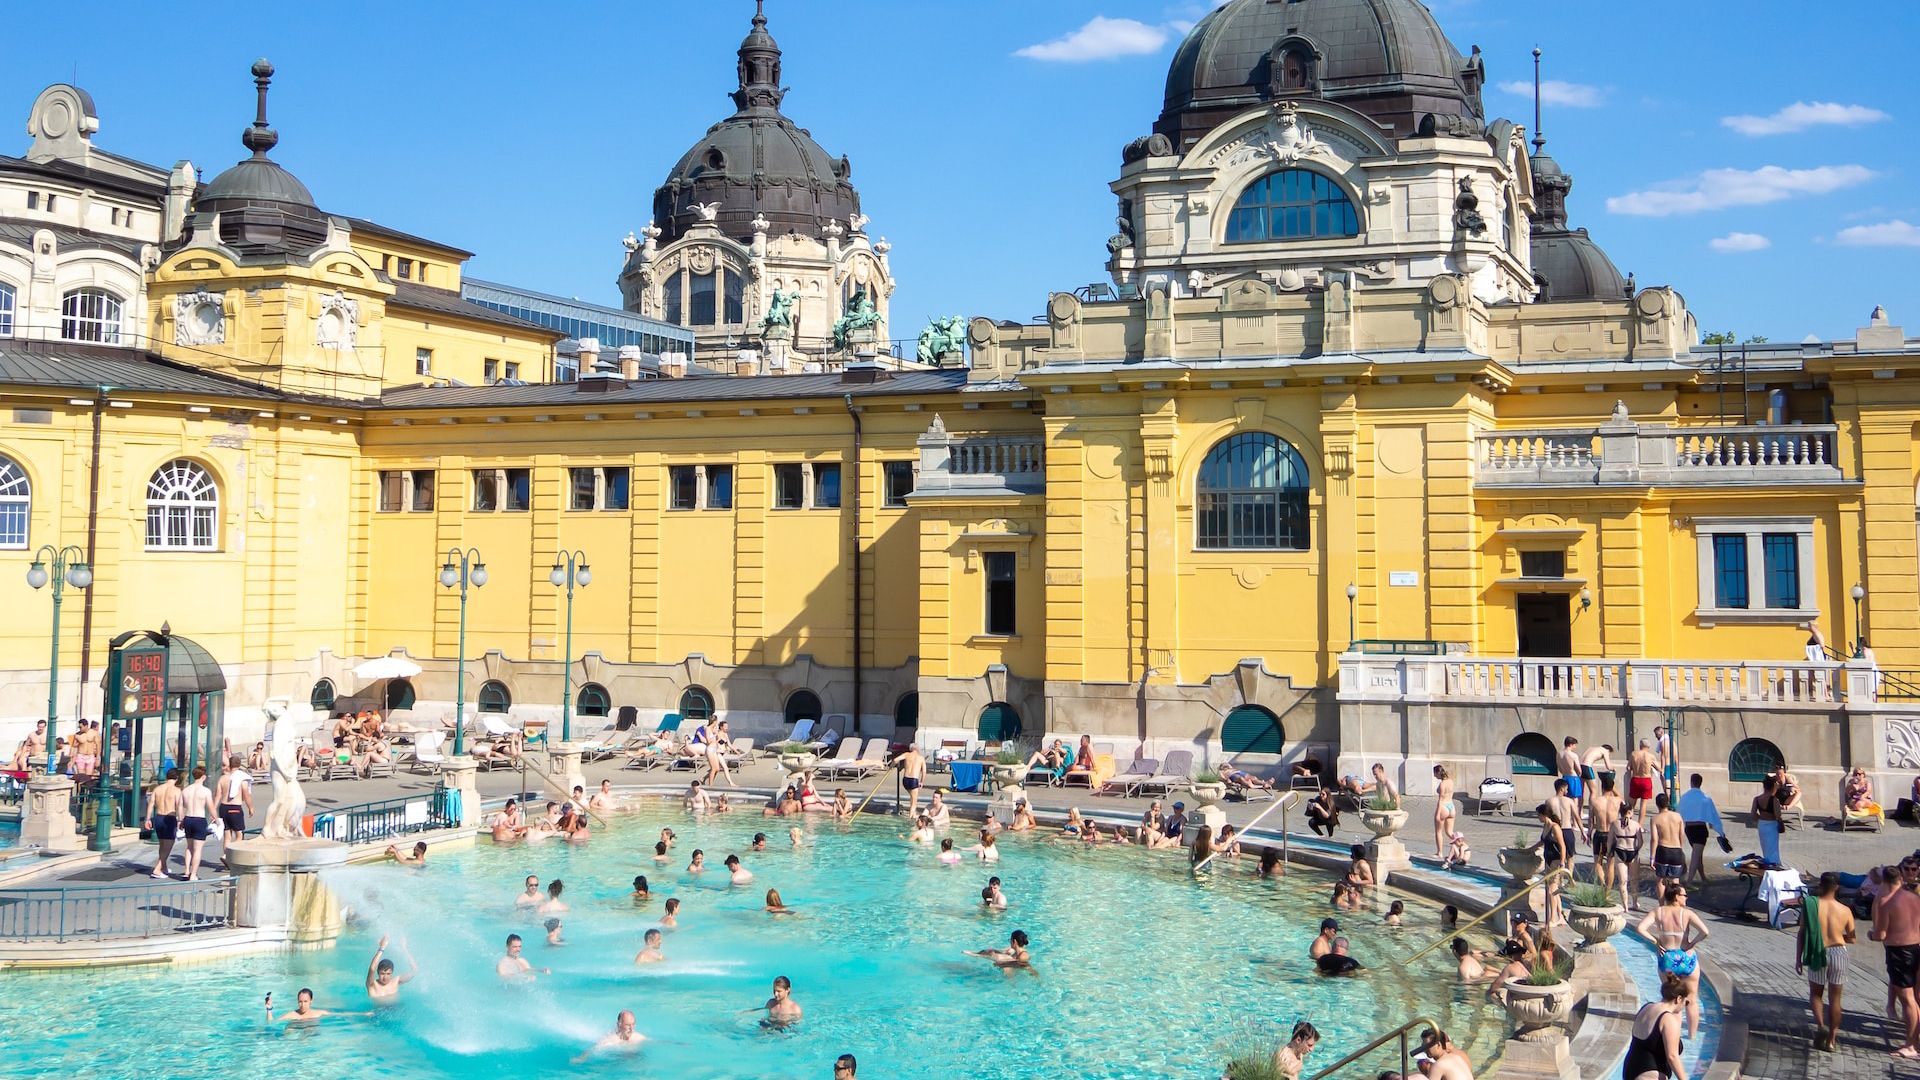 Széchenyi thermal bath outdoor